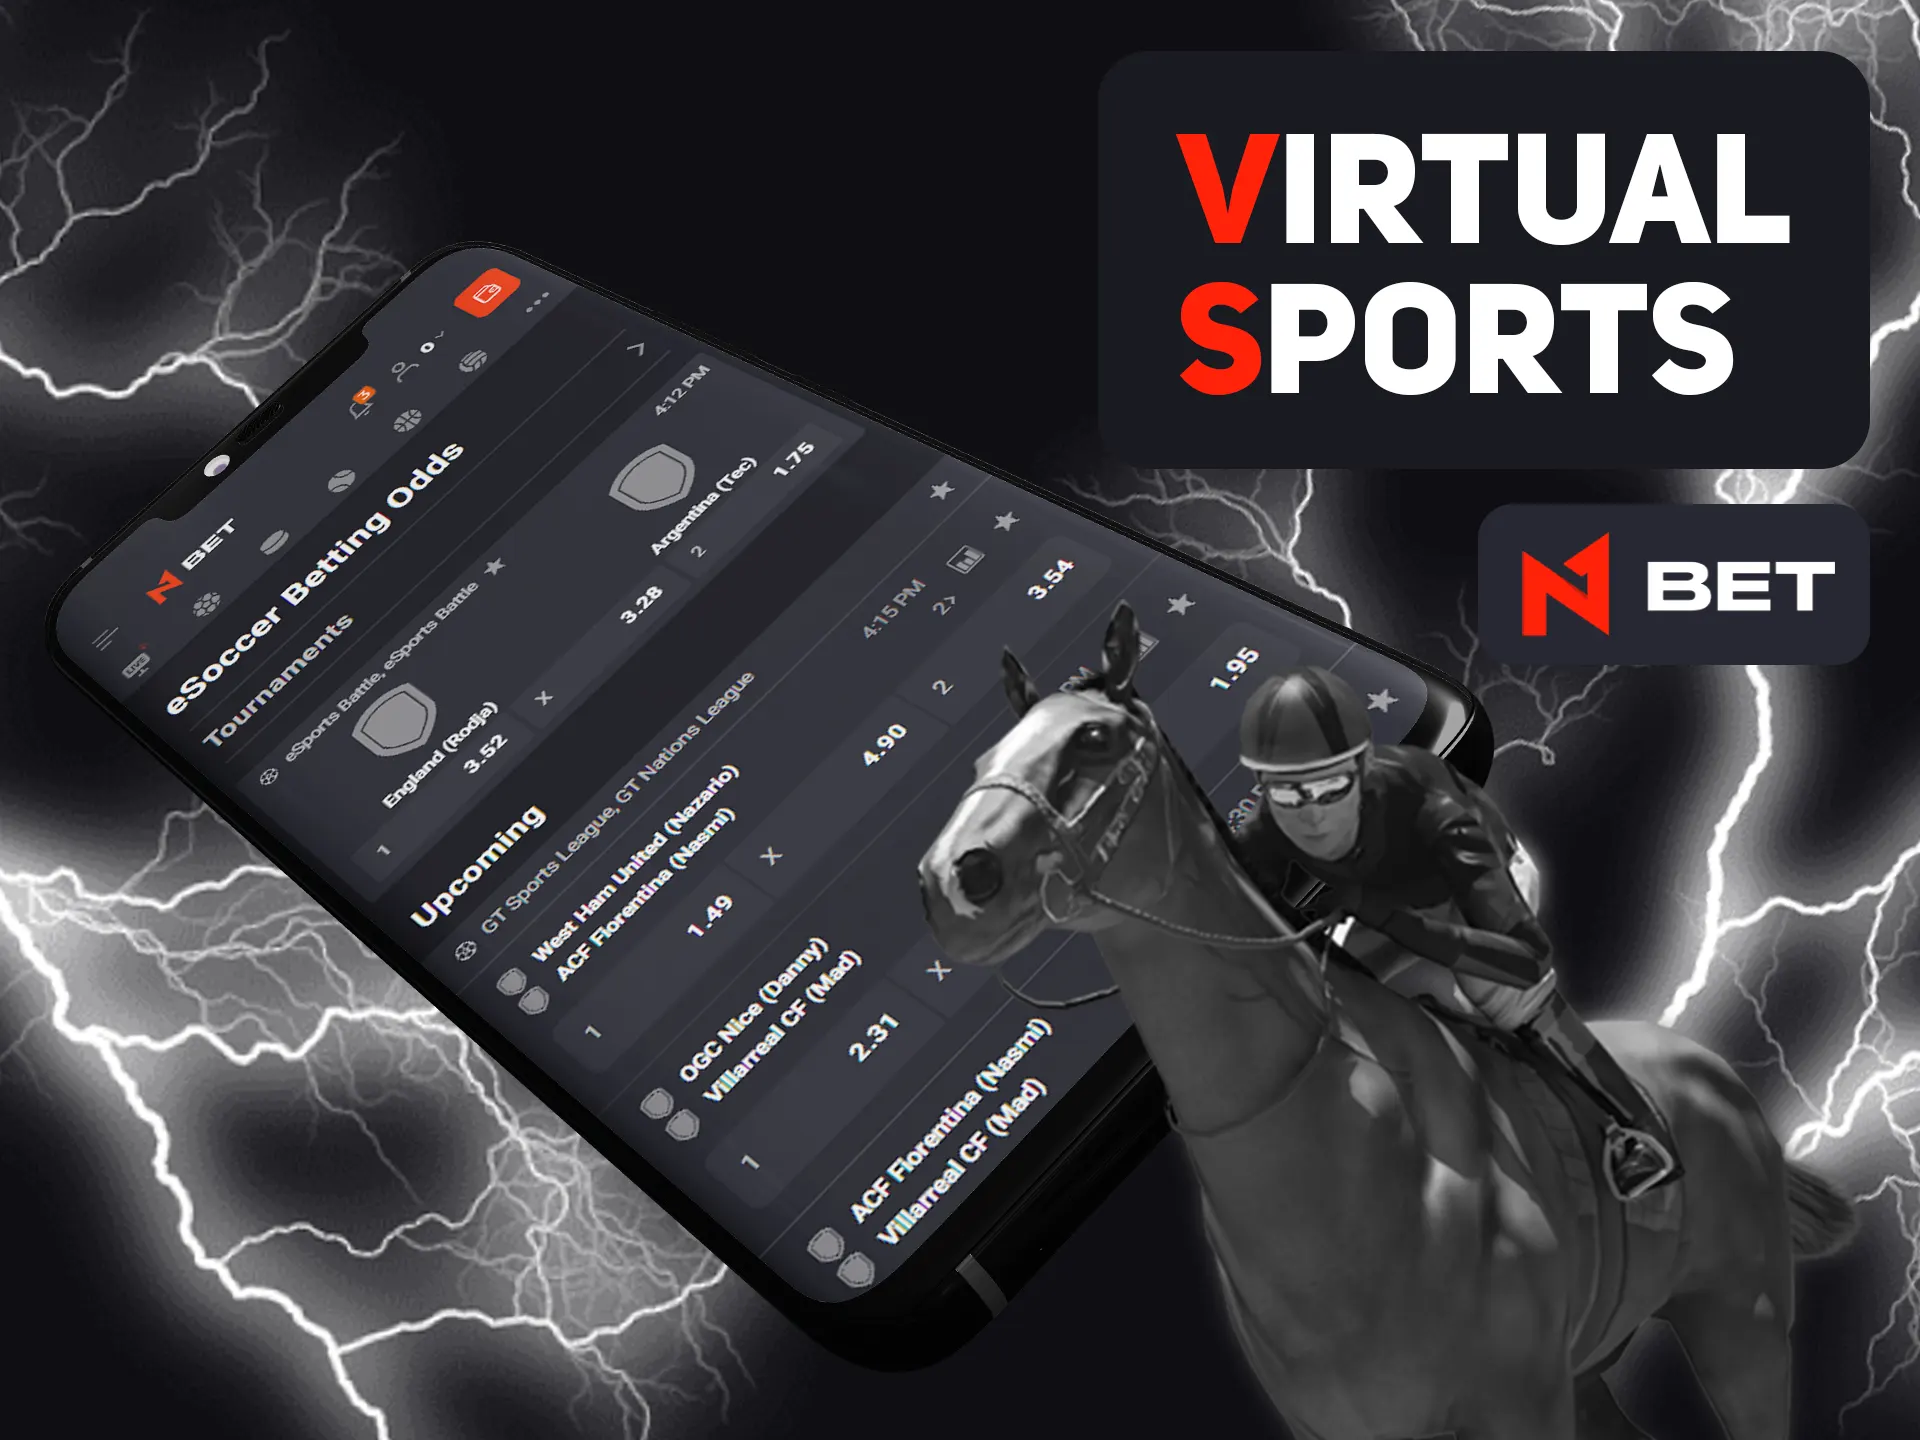 Search for most intresting virtual sports for bet in N1bet app.